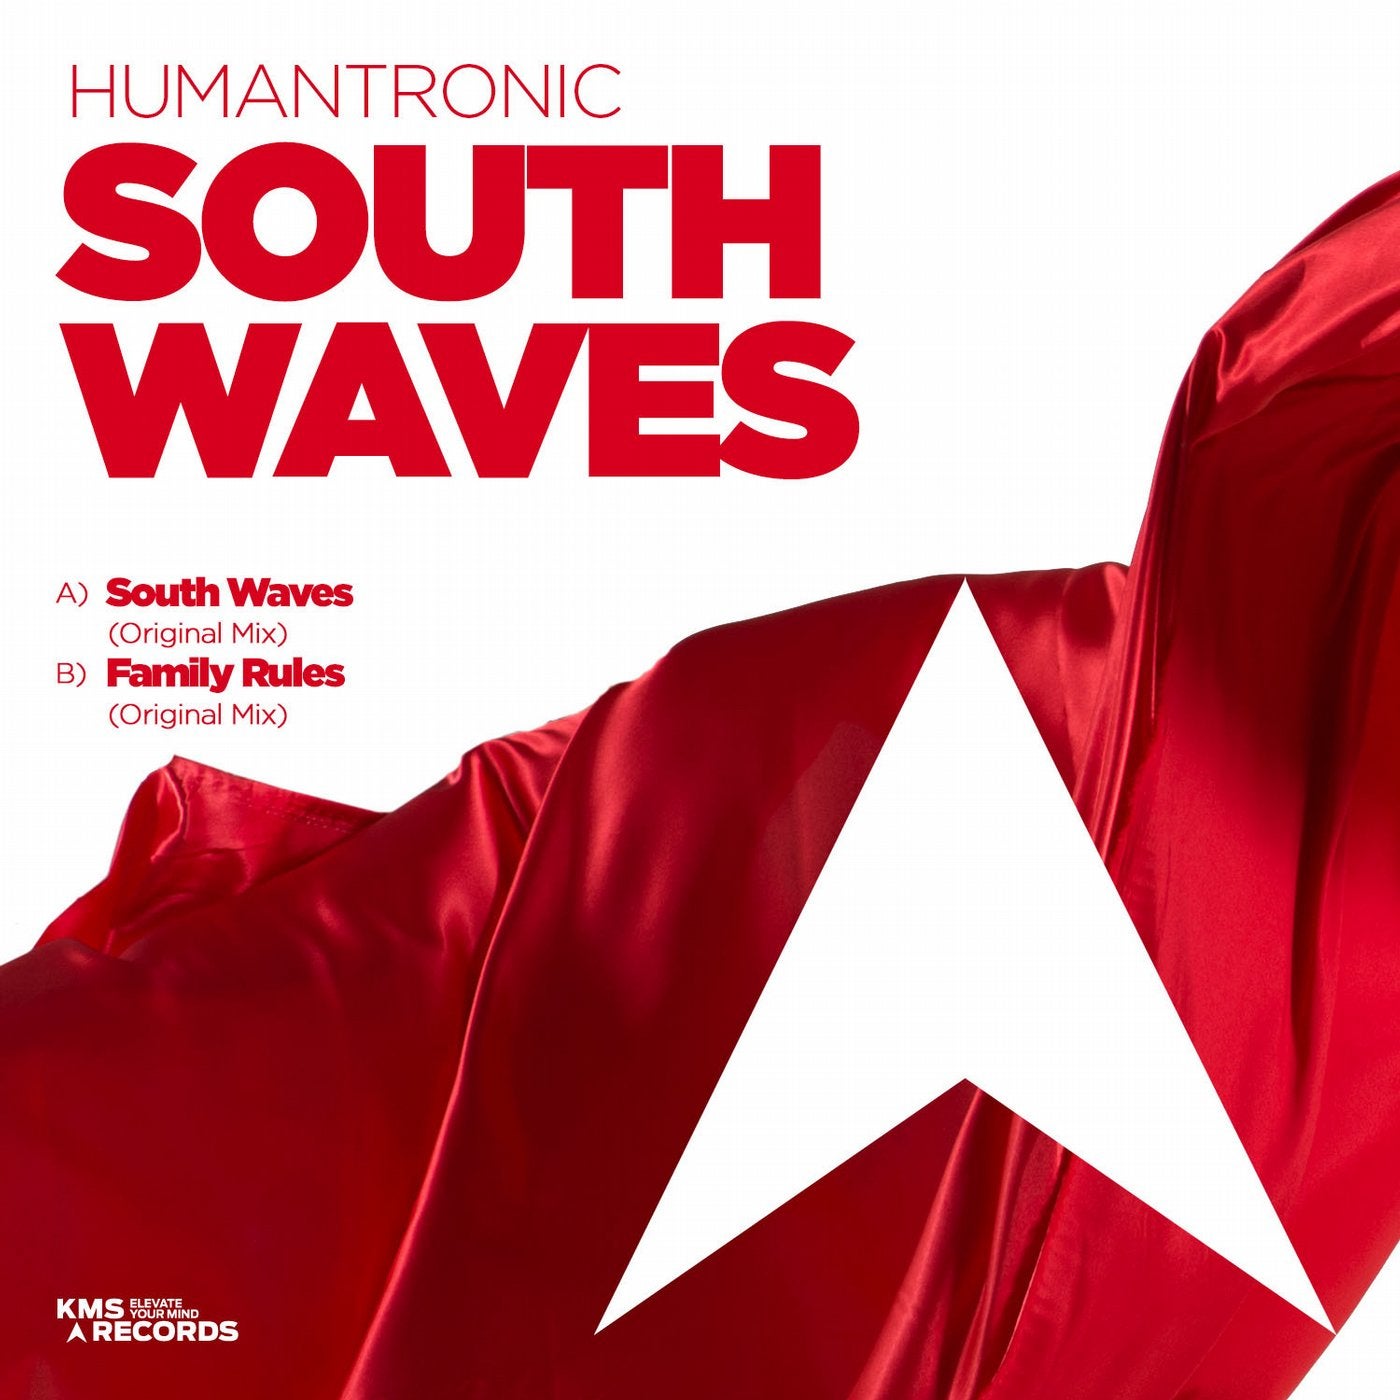 South Waves